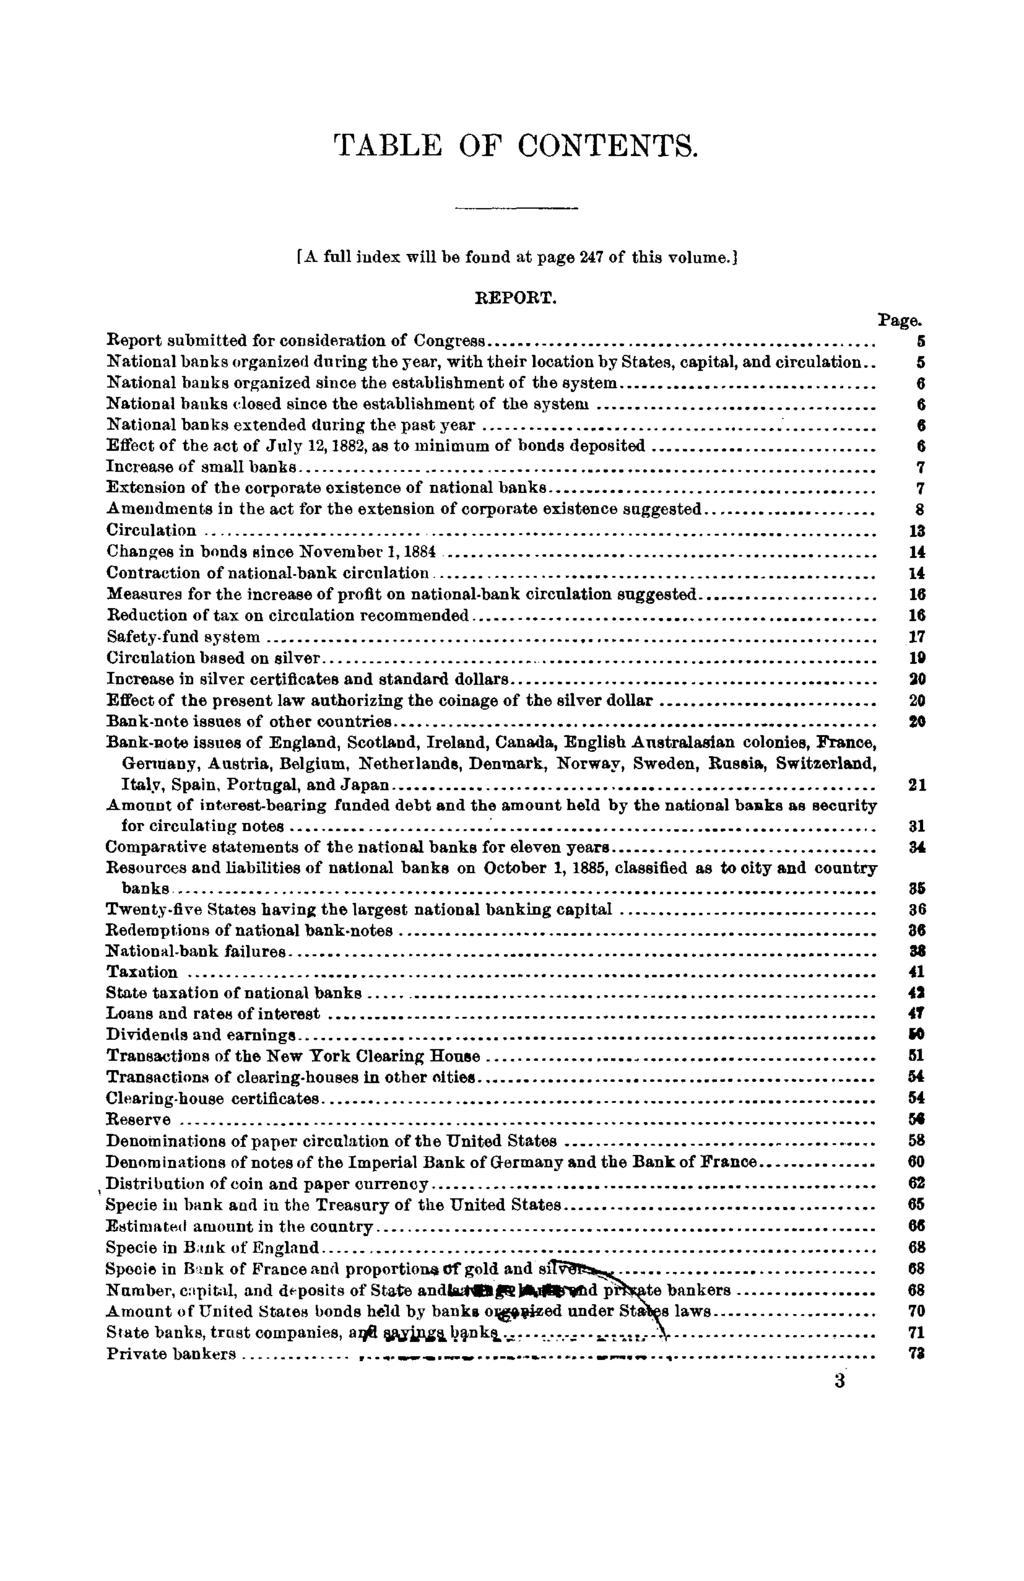 TABLE OF CONTENTS. f A full index will be found at page 247 of this volume.] REPORT. Page.